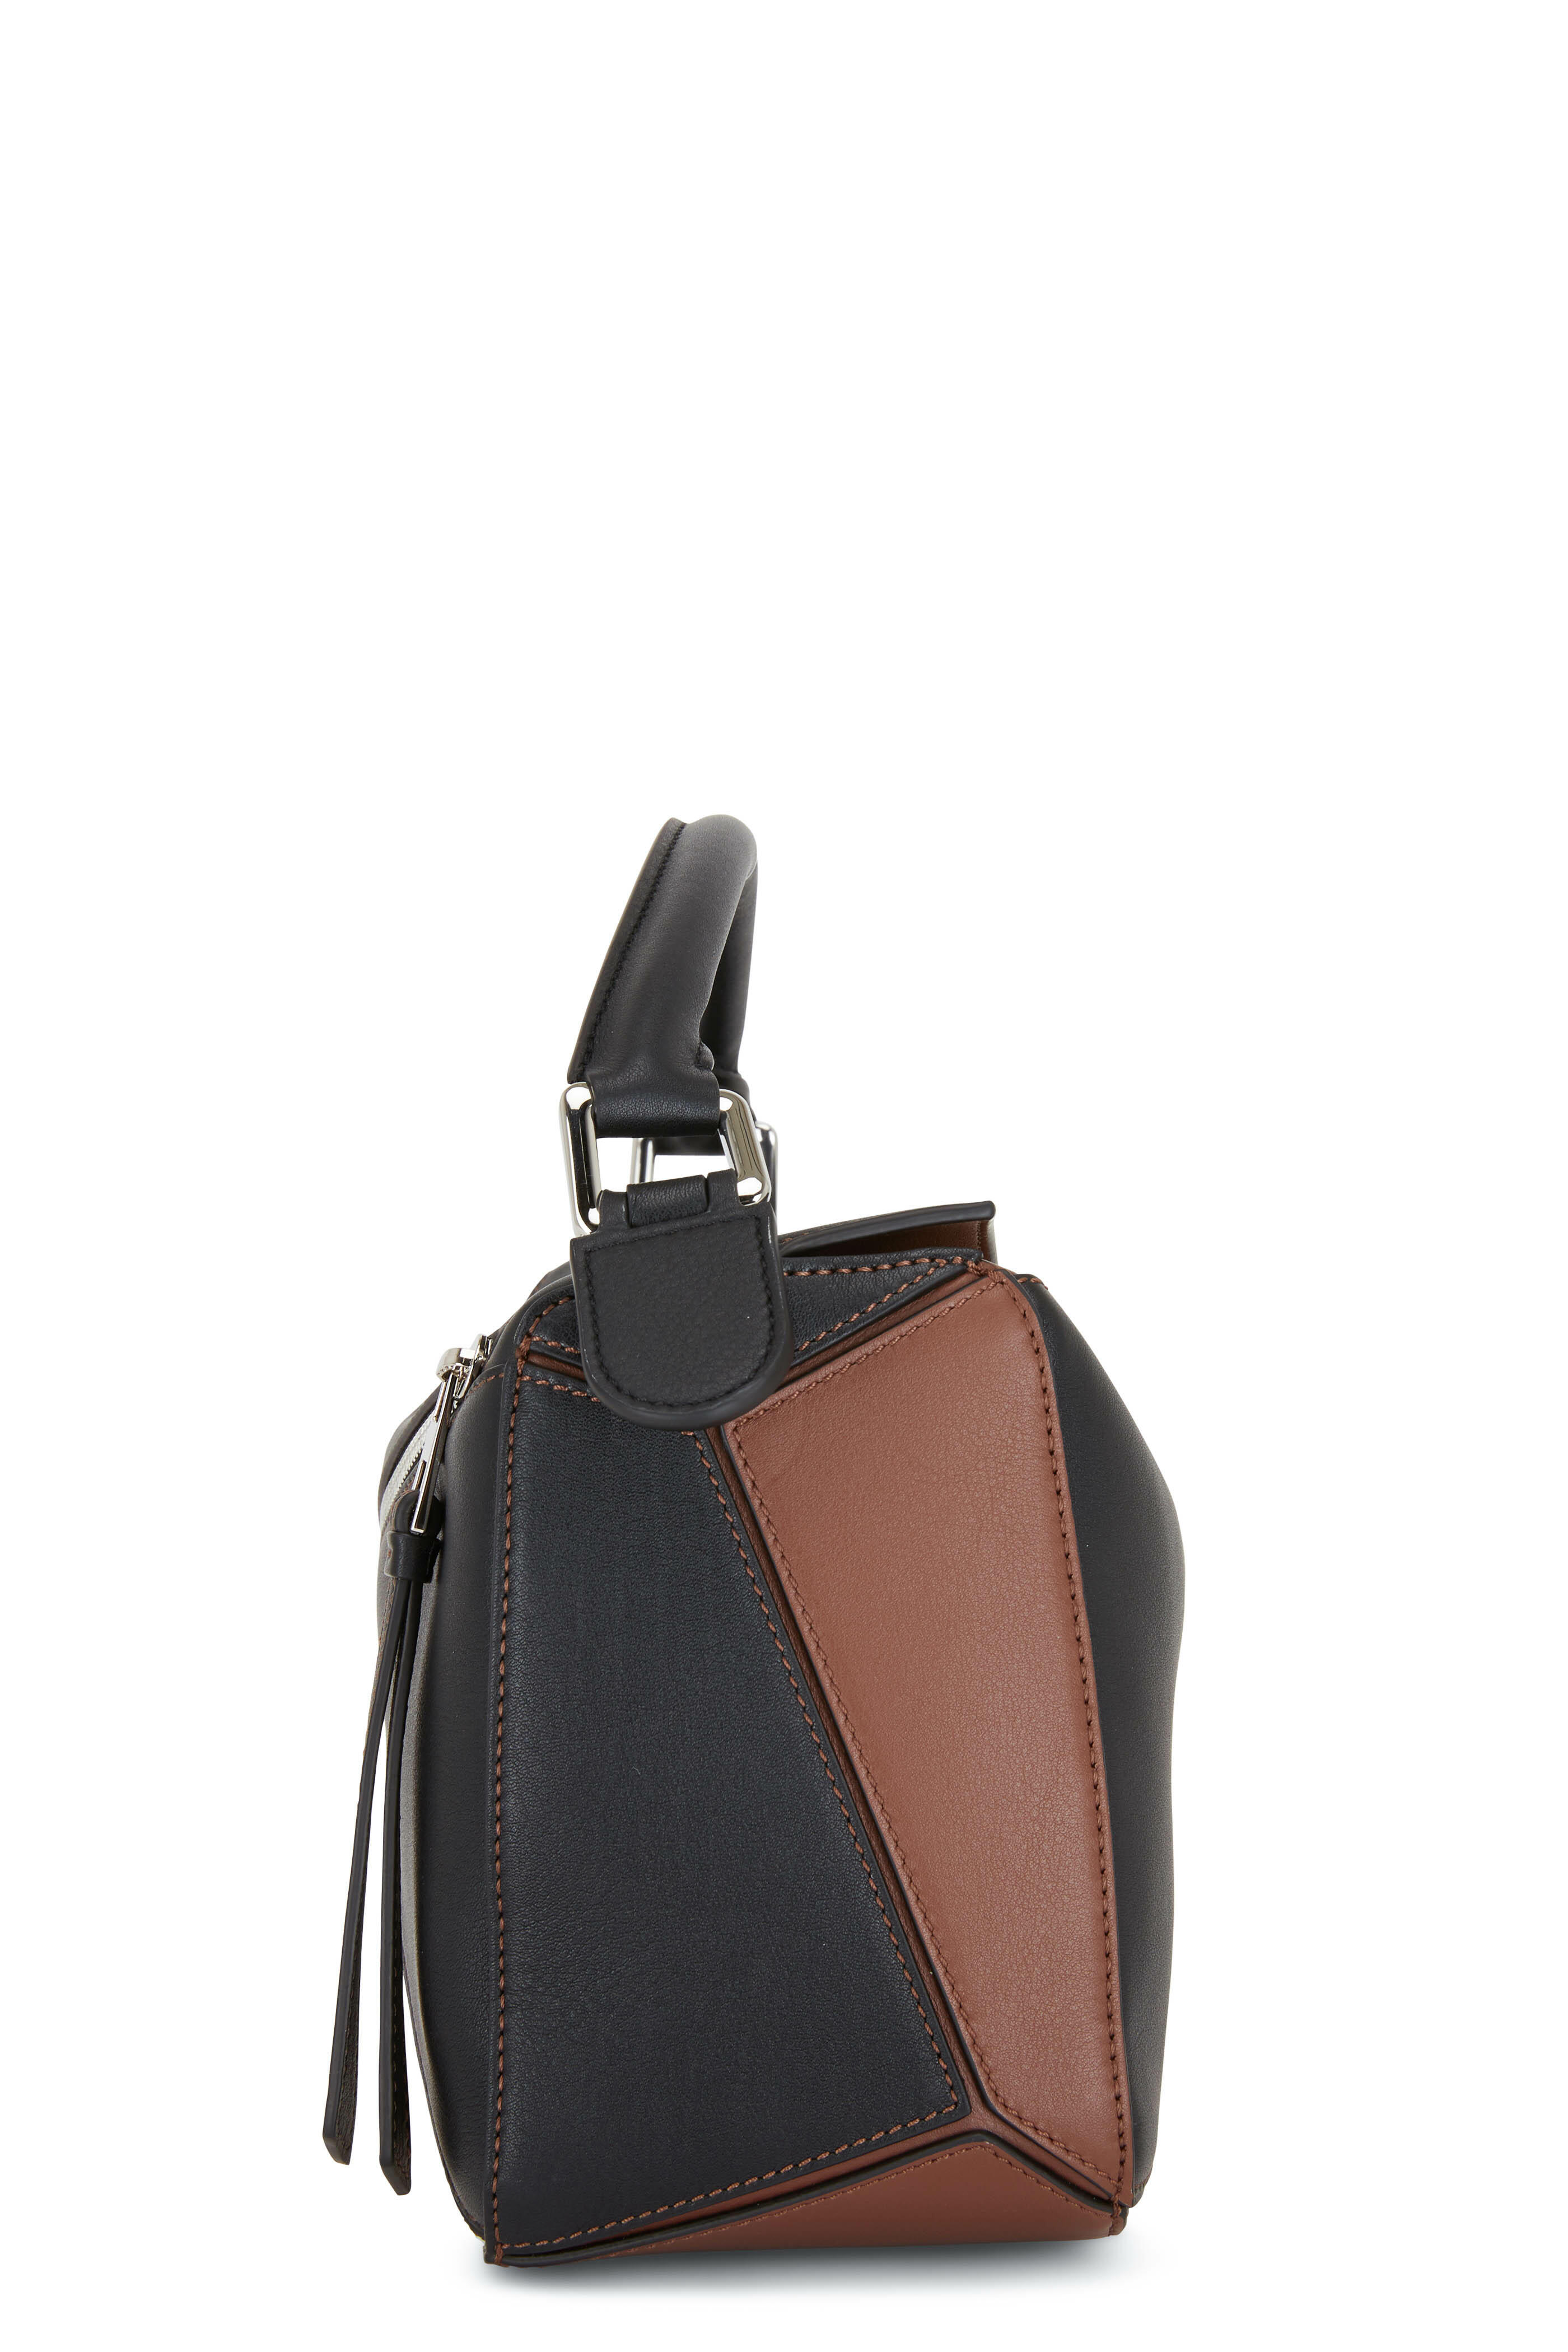 LOEWE Small Leather Puzzle Top-Handle Bag